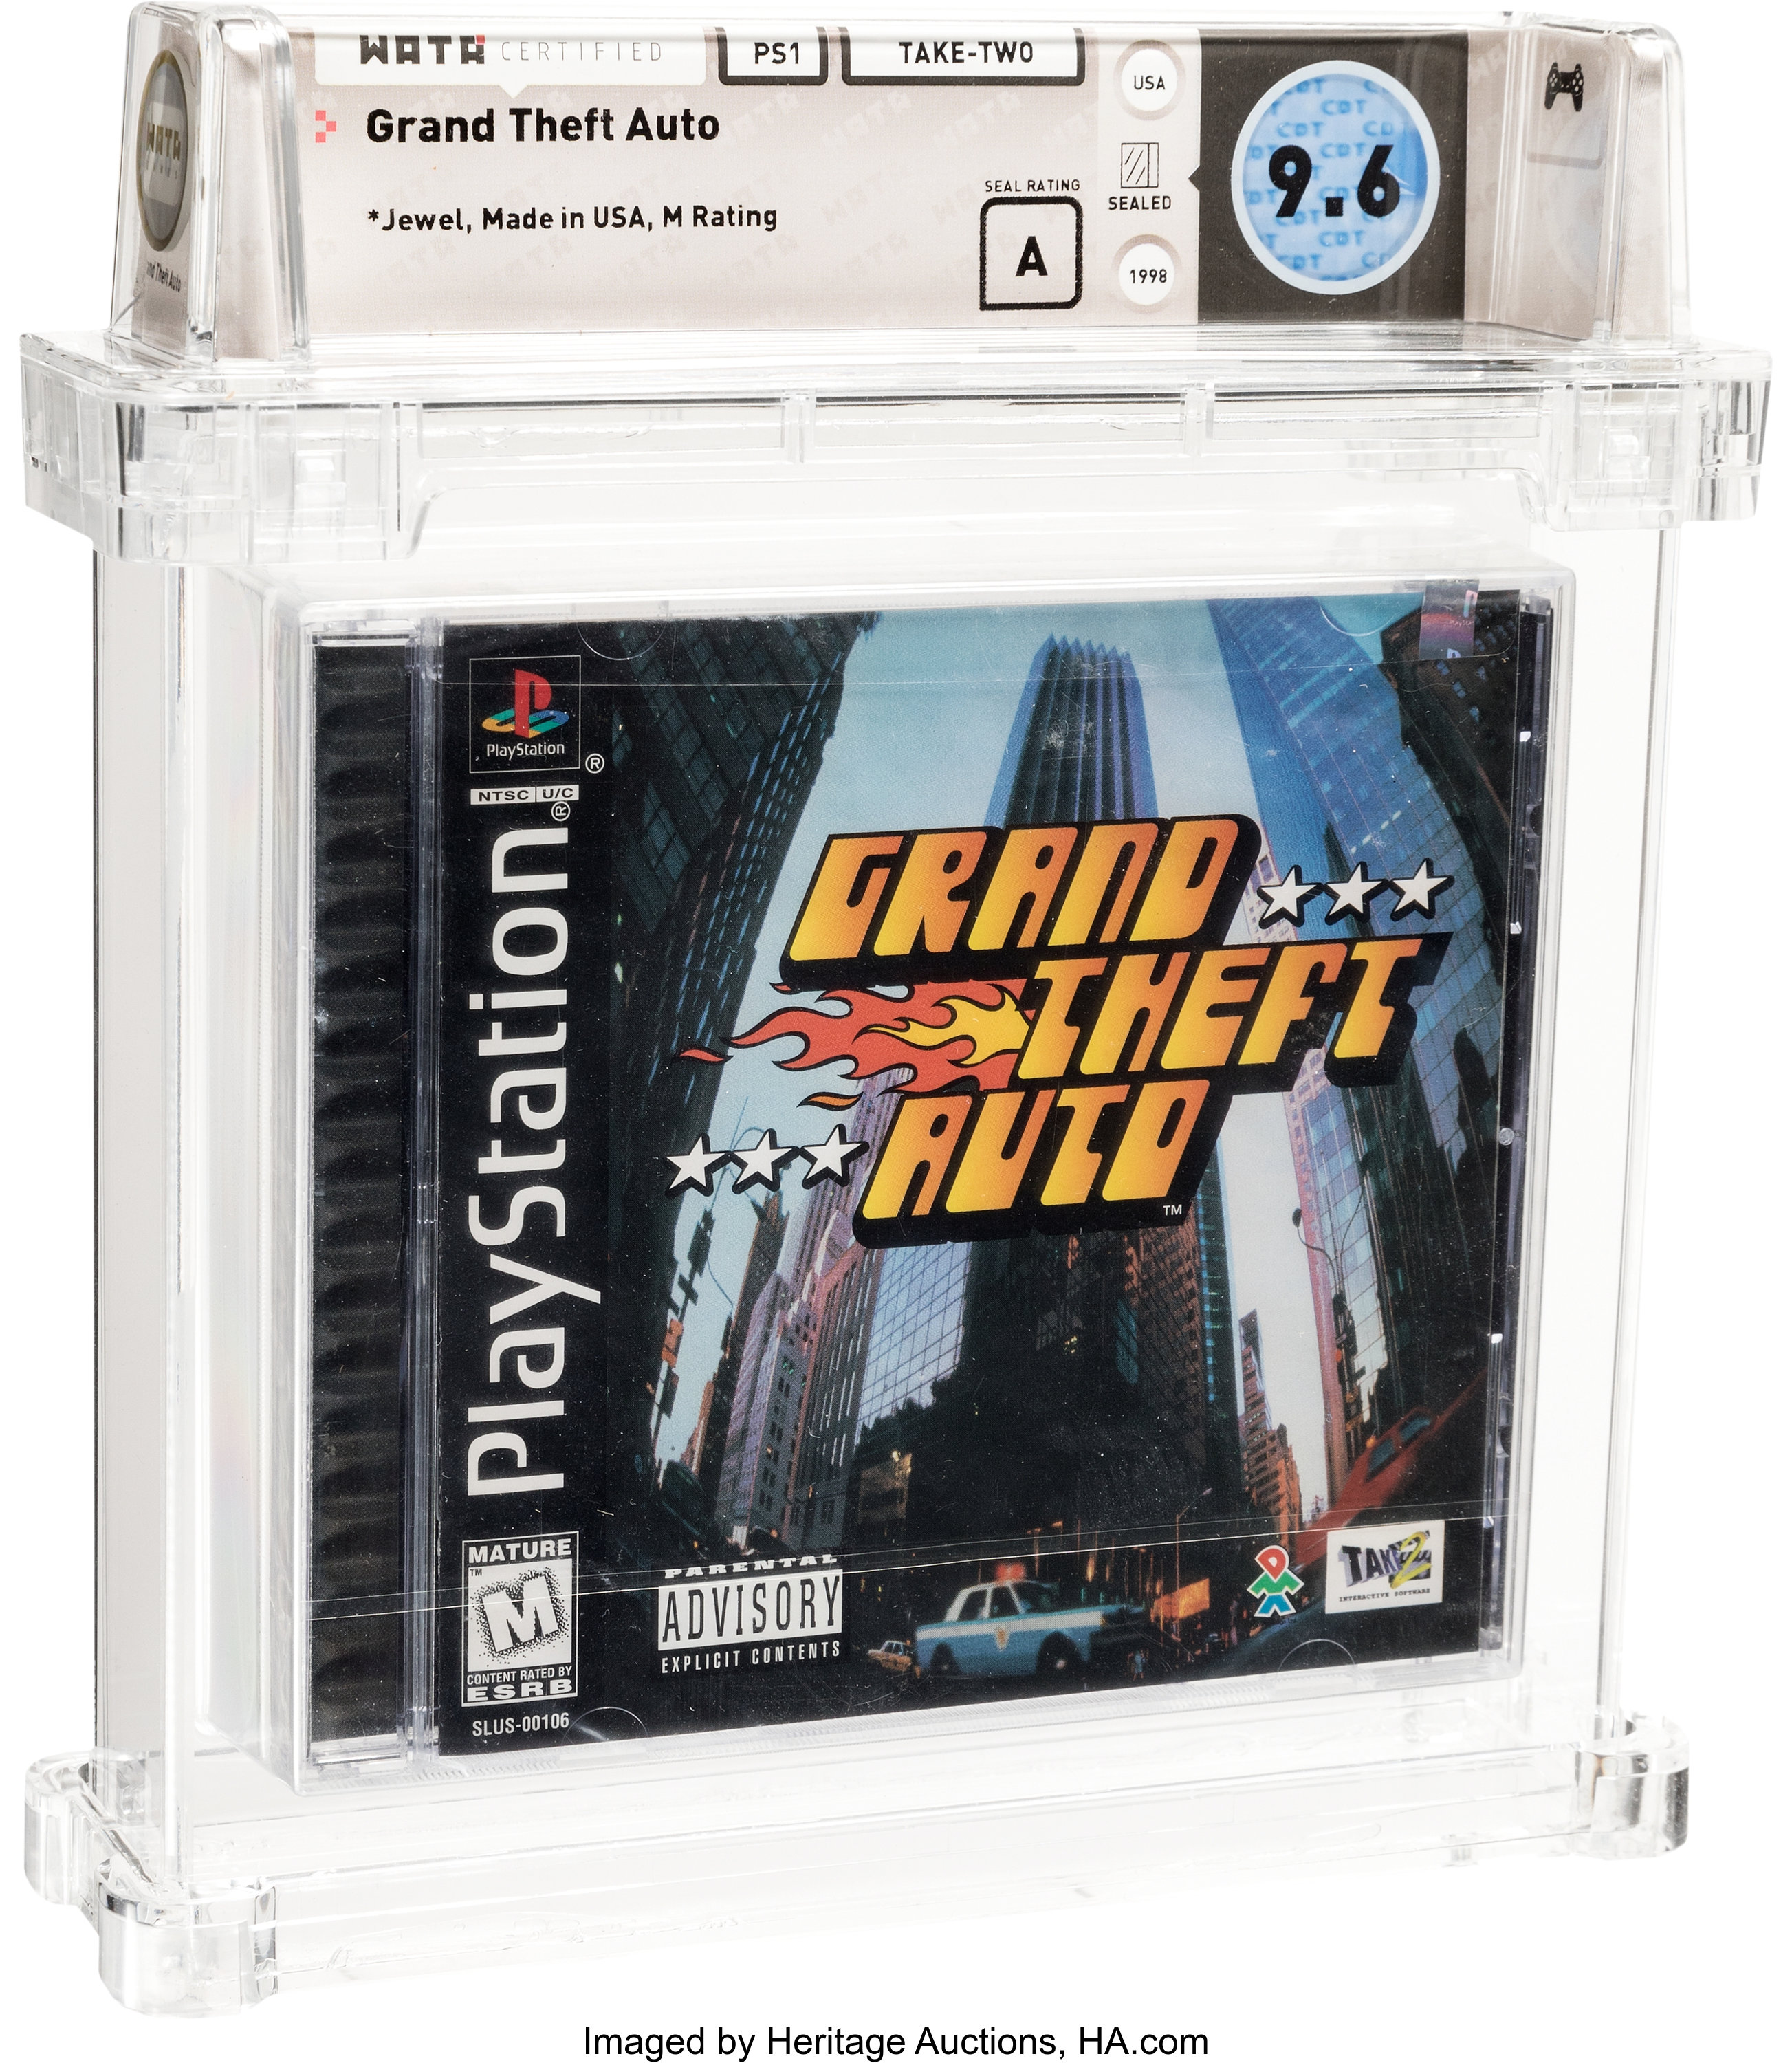 indiantraders N N GB with grand theft auto IV [ PS2 ] Price in